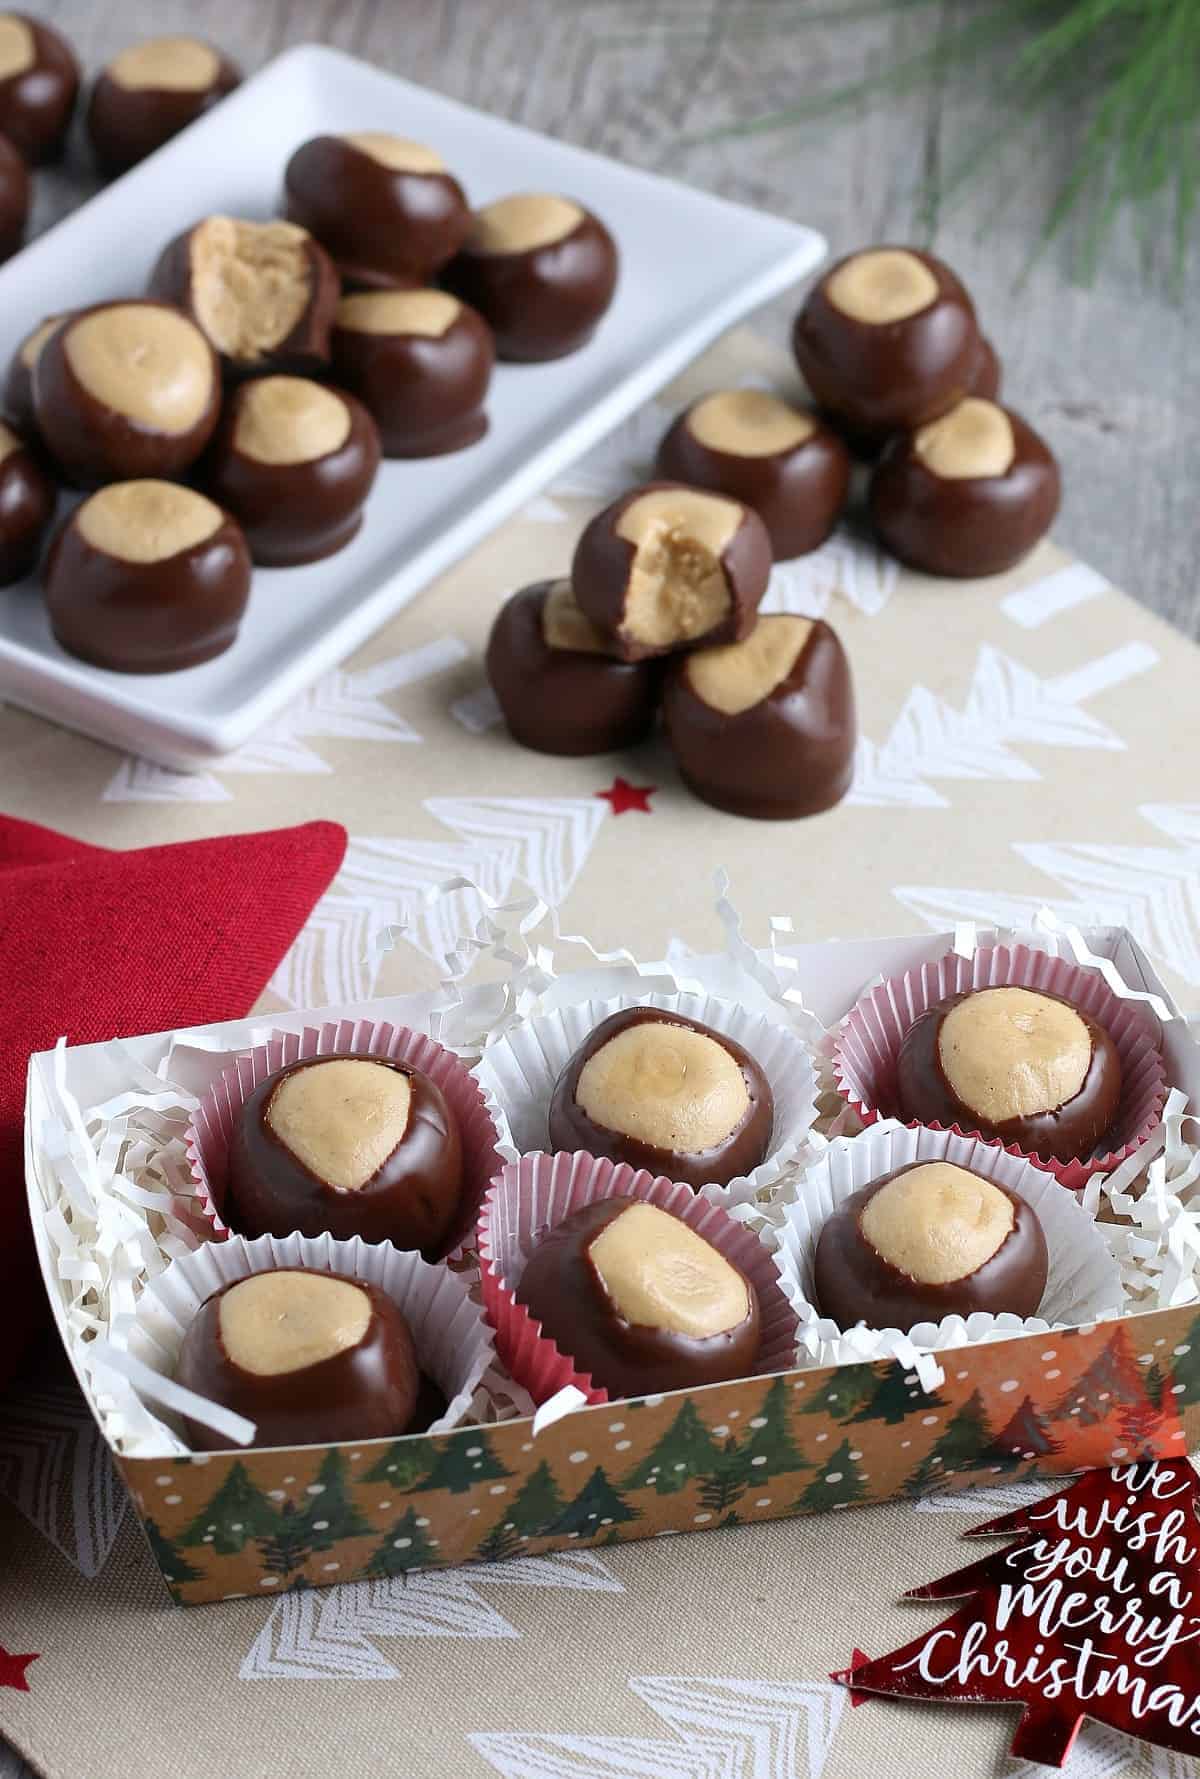 Box full of vegan buckeye candy in paper cups with red and white decoration.